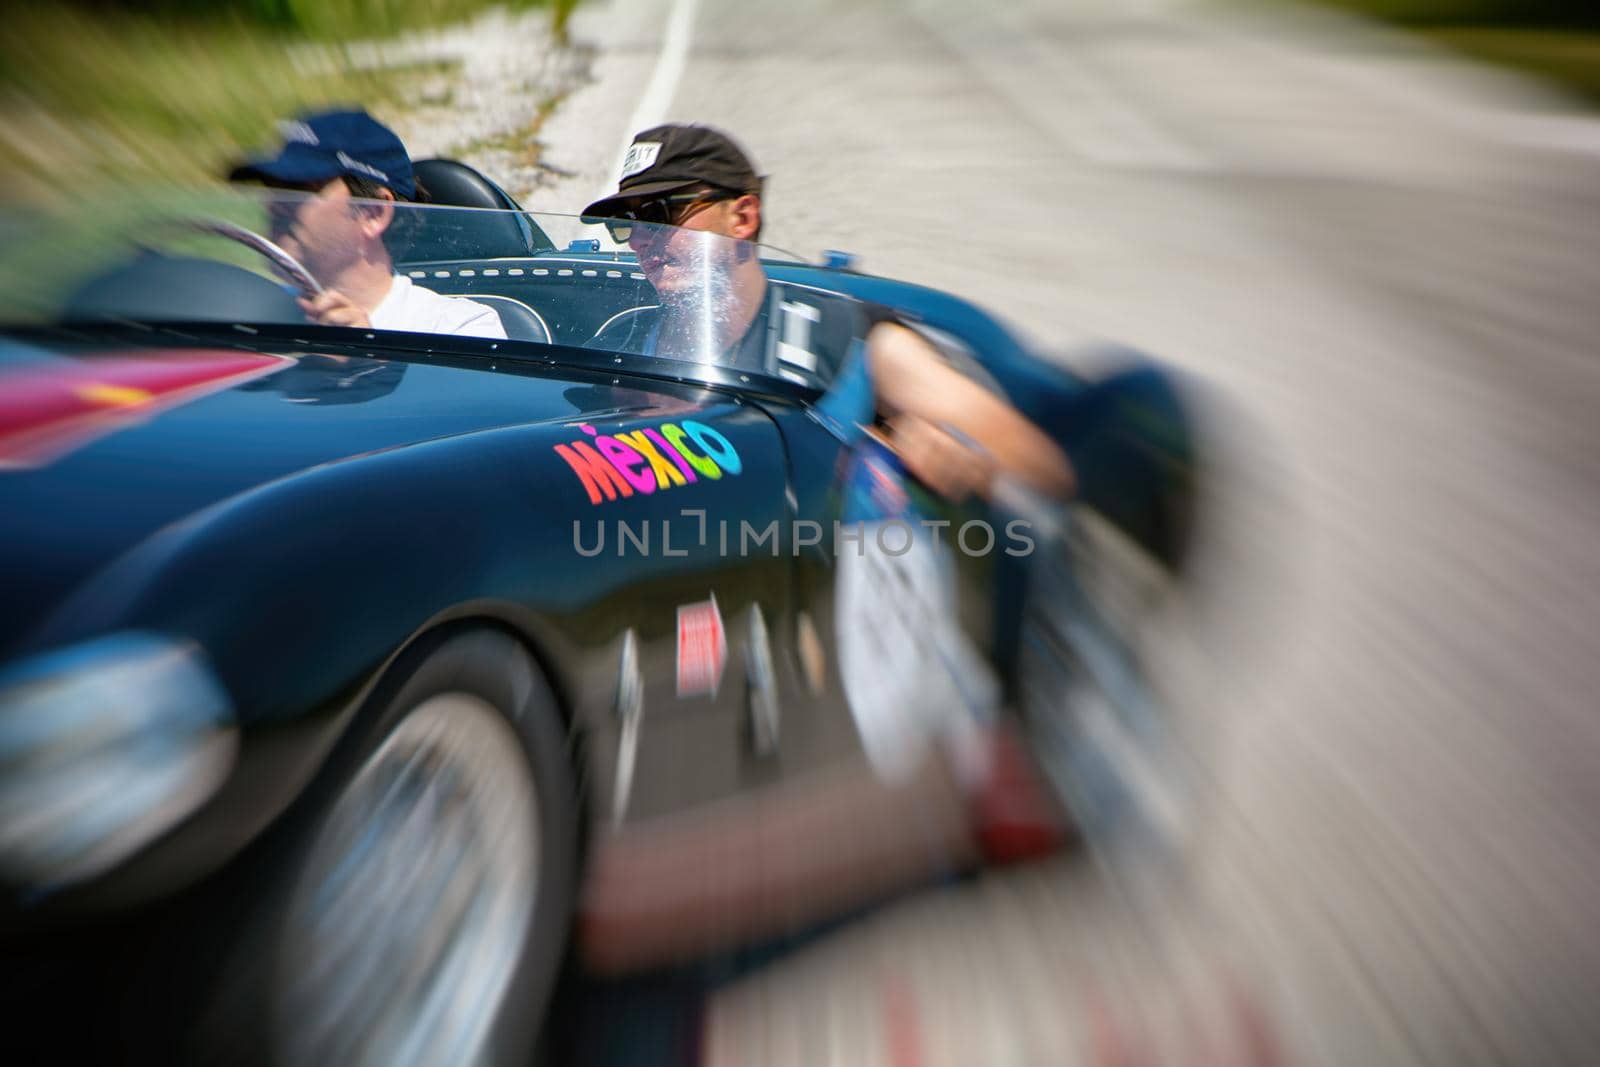 URBINO, ITALY - JUN 16 - 2022 : FERRARI 166 MM SPIDER VIGNALE 1953 on an old racing car in rally Mille Miglia 2022 the famous italian historical race (1927-1957